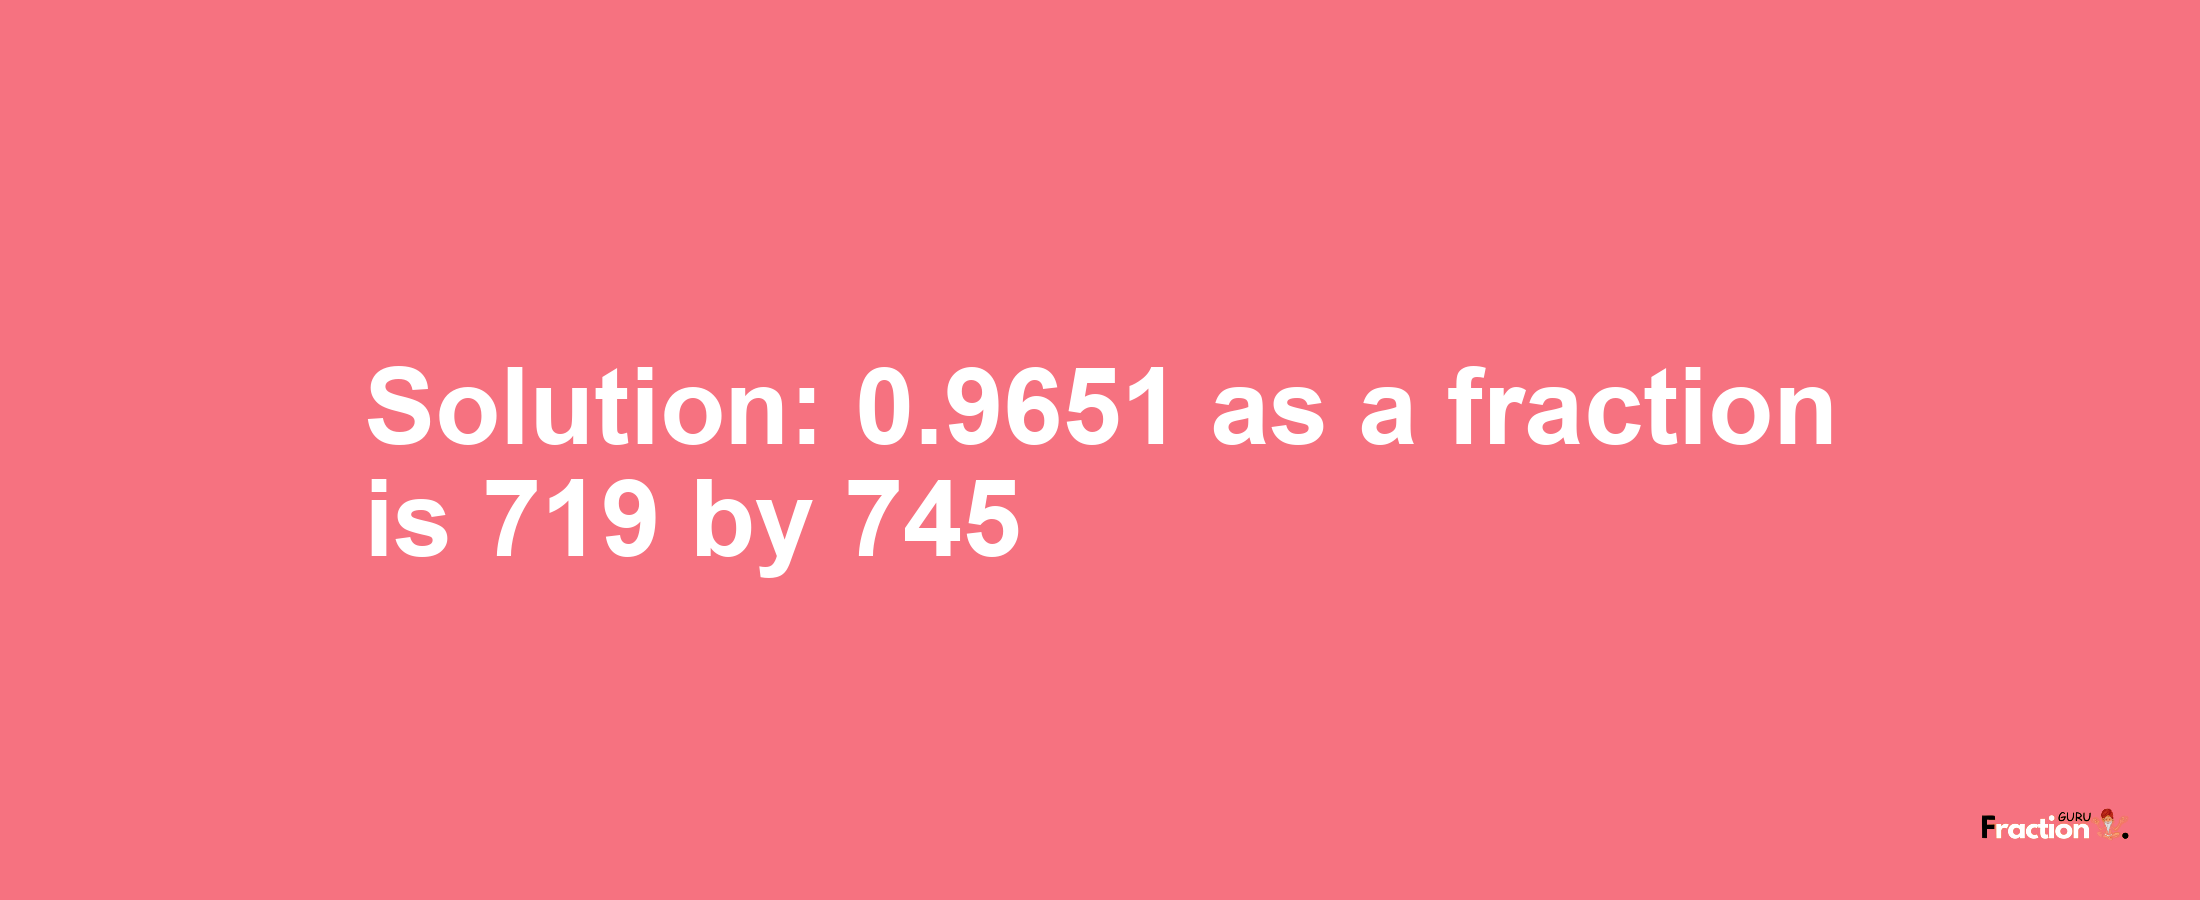 Solution:0.9651 as a fraction is 719/745